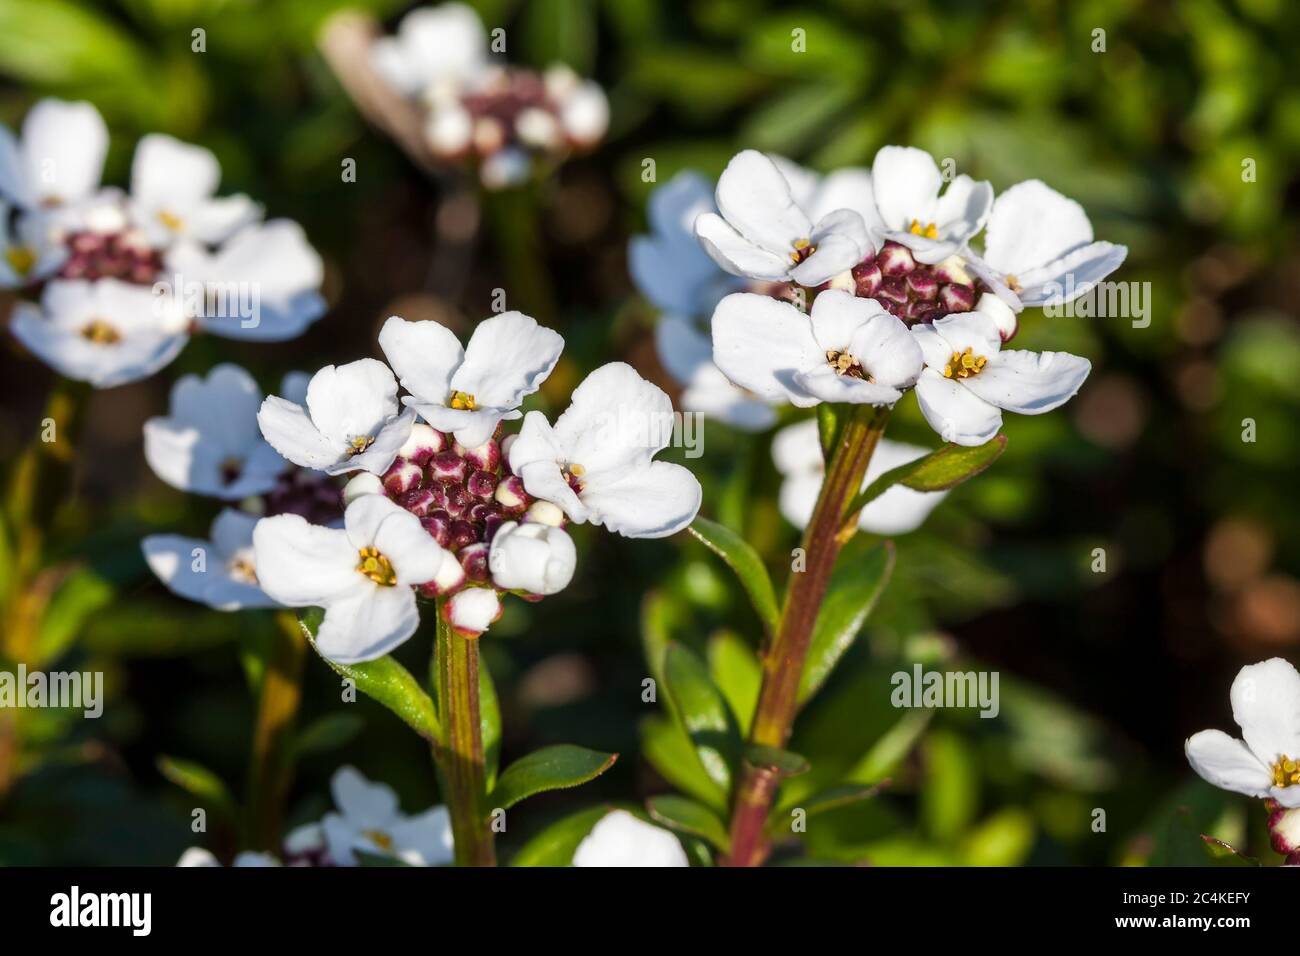 Iberis sempervirens 'Snowflake' a spring summer white perennial bulbous flower plant commonly known as perennial candytuft Stock Photo